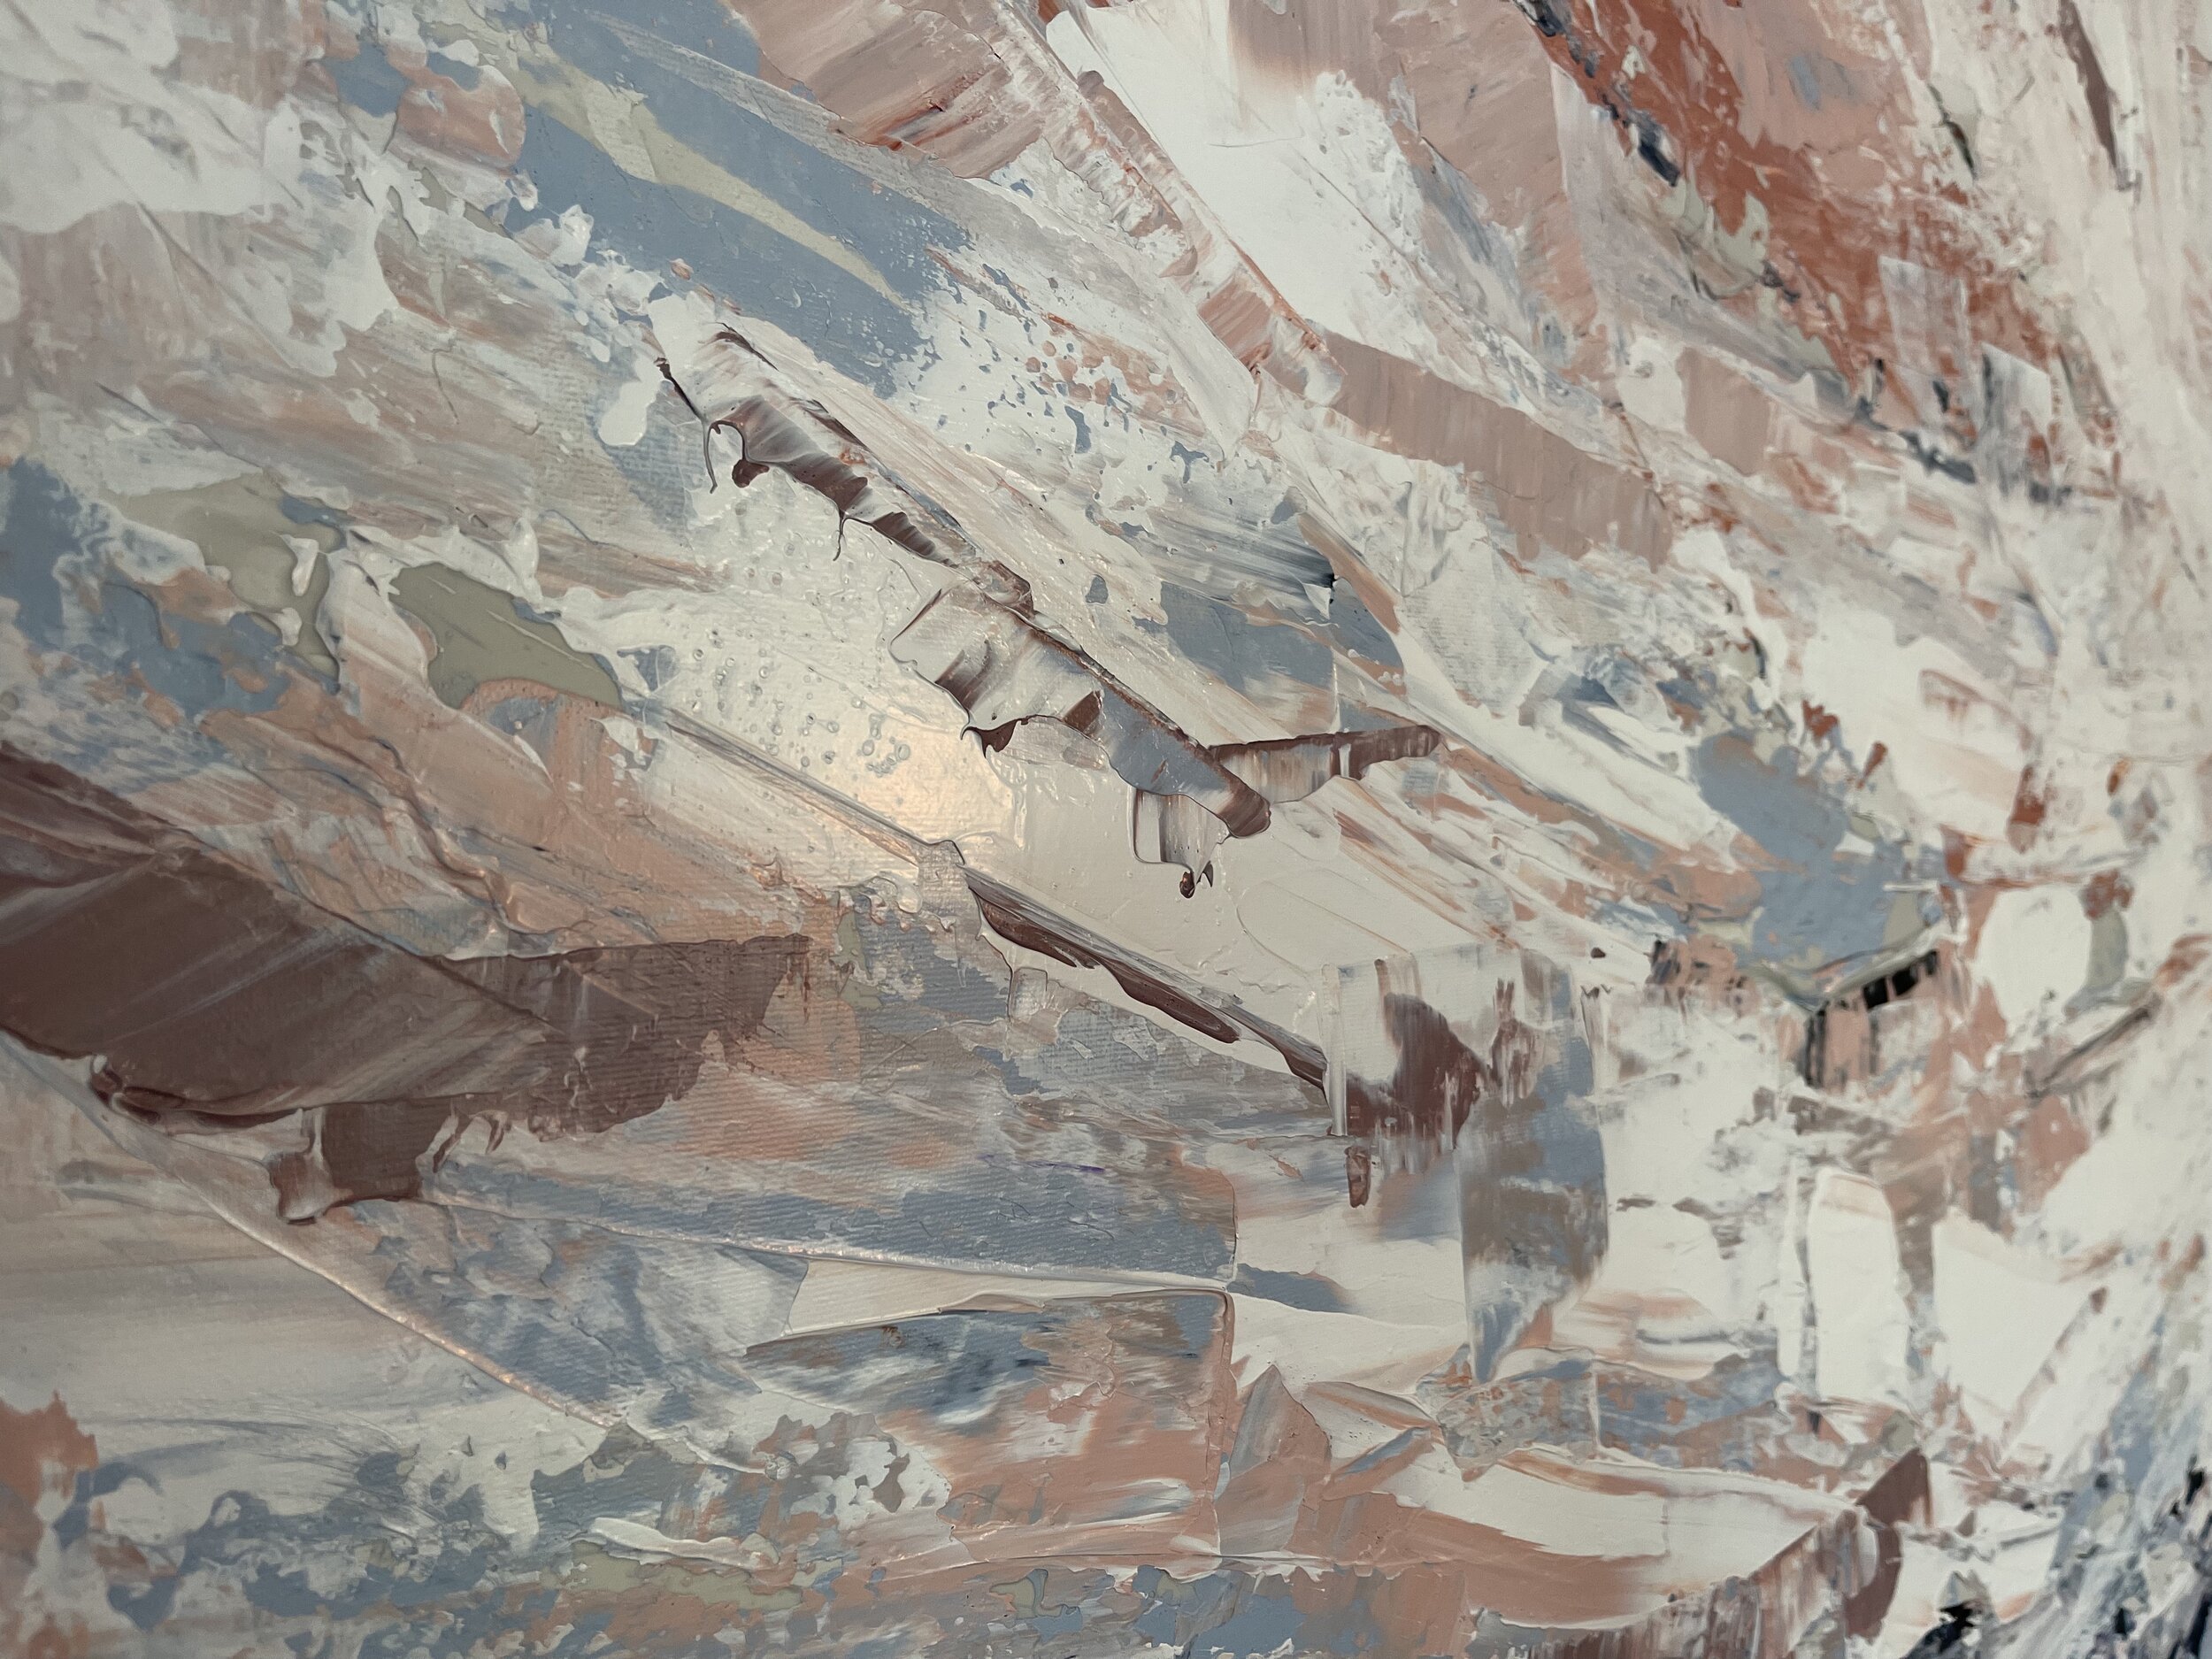  Here are some up close and detailed images of Donna Giraud’s textural abstract work. The layers of paint and unique shapes allow for tons of depth and a constant evolution in what you see when you look at it.  